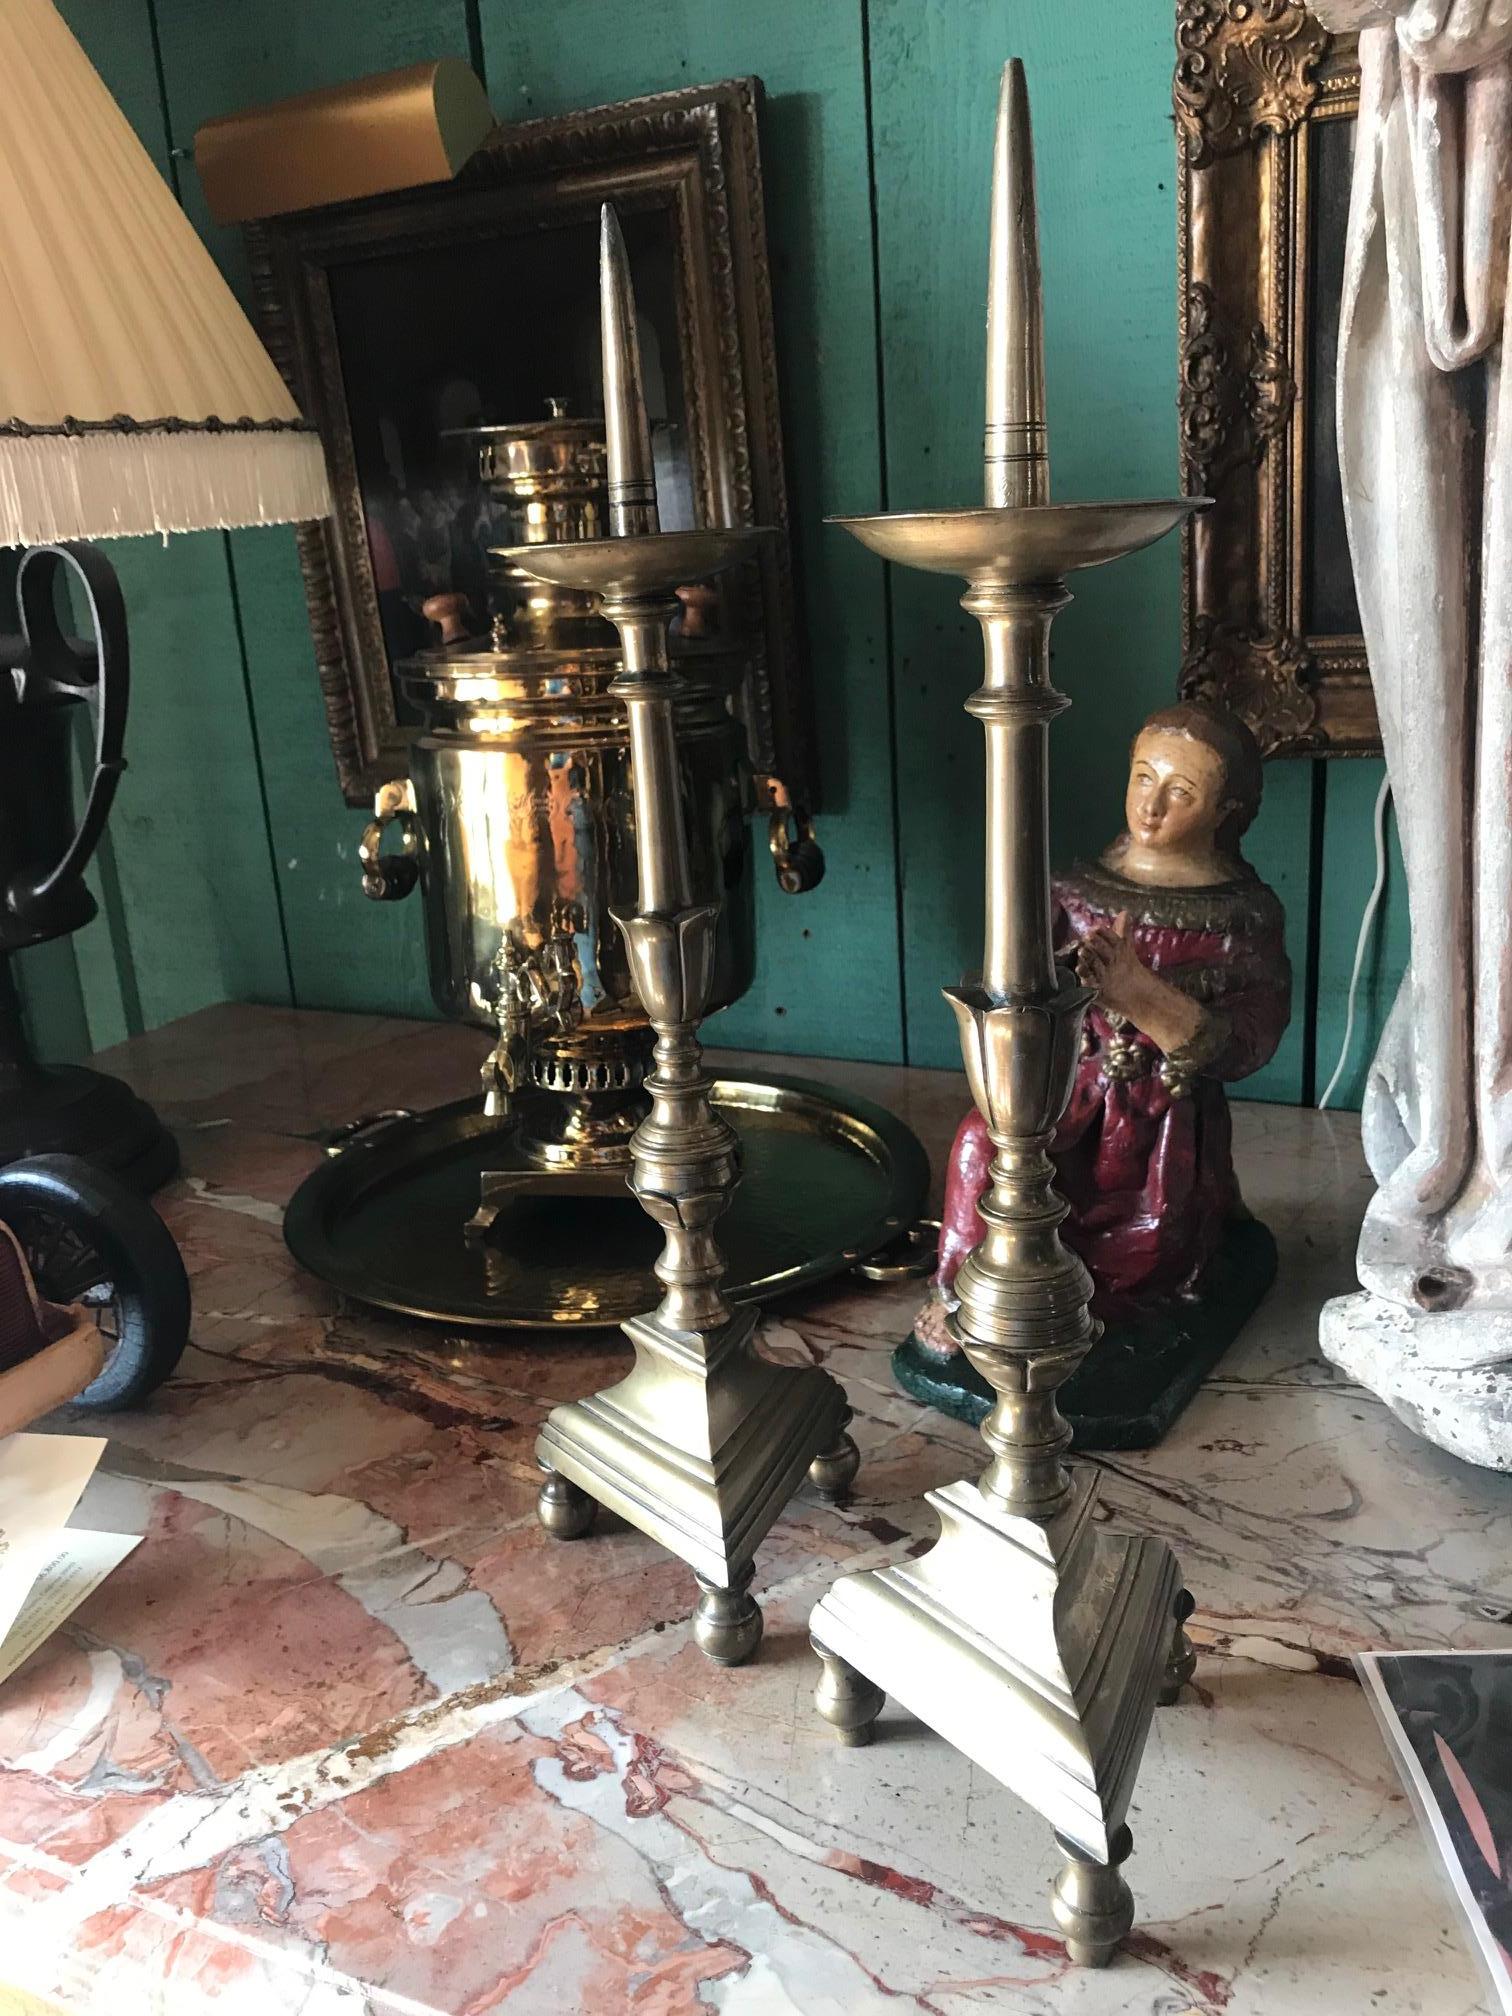 A very beautiful simple pair of 17th century Louis XIV period candleholders candlesticks in brass. The mirroring work with the multiple layers and lines from the bobeche down to the elegant triangle geometric base. We have seen many that were turned